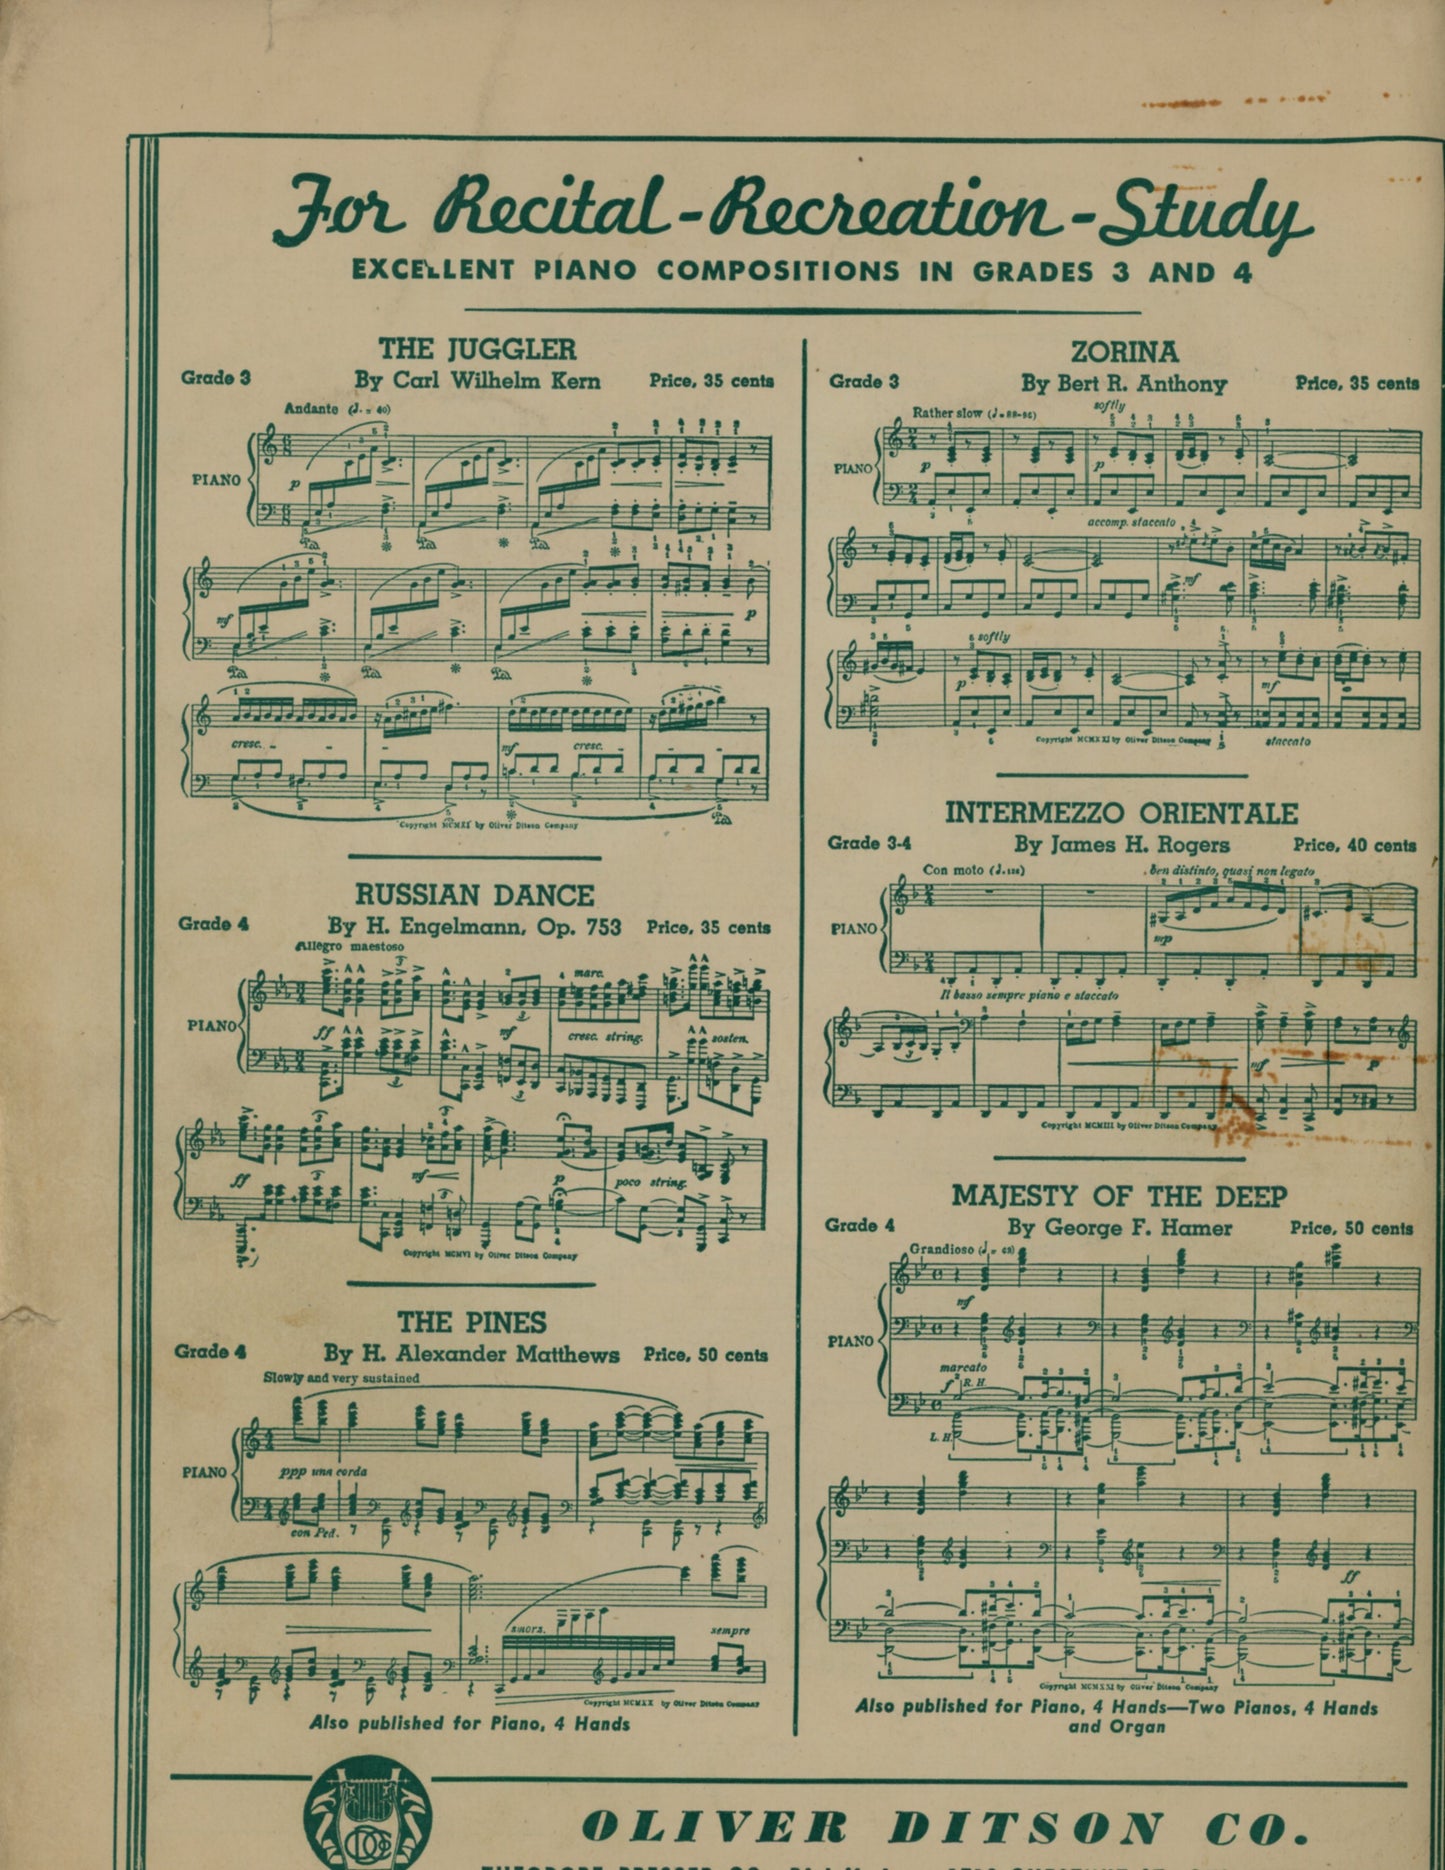 SEA IDYL for the Piano by Opal Louise Hayes Sheet Music ©1947